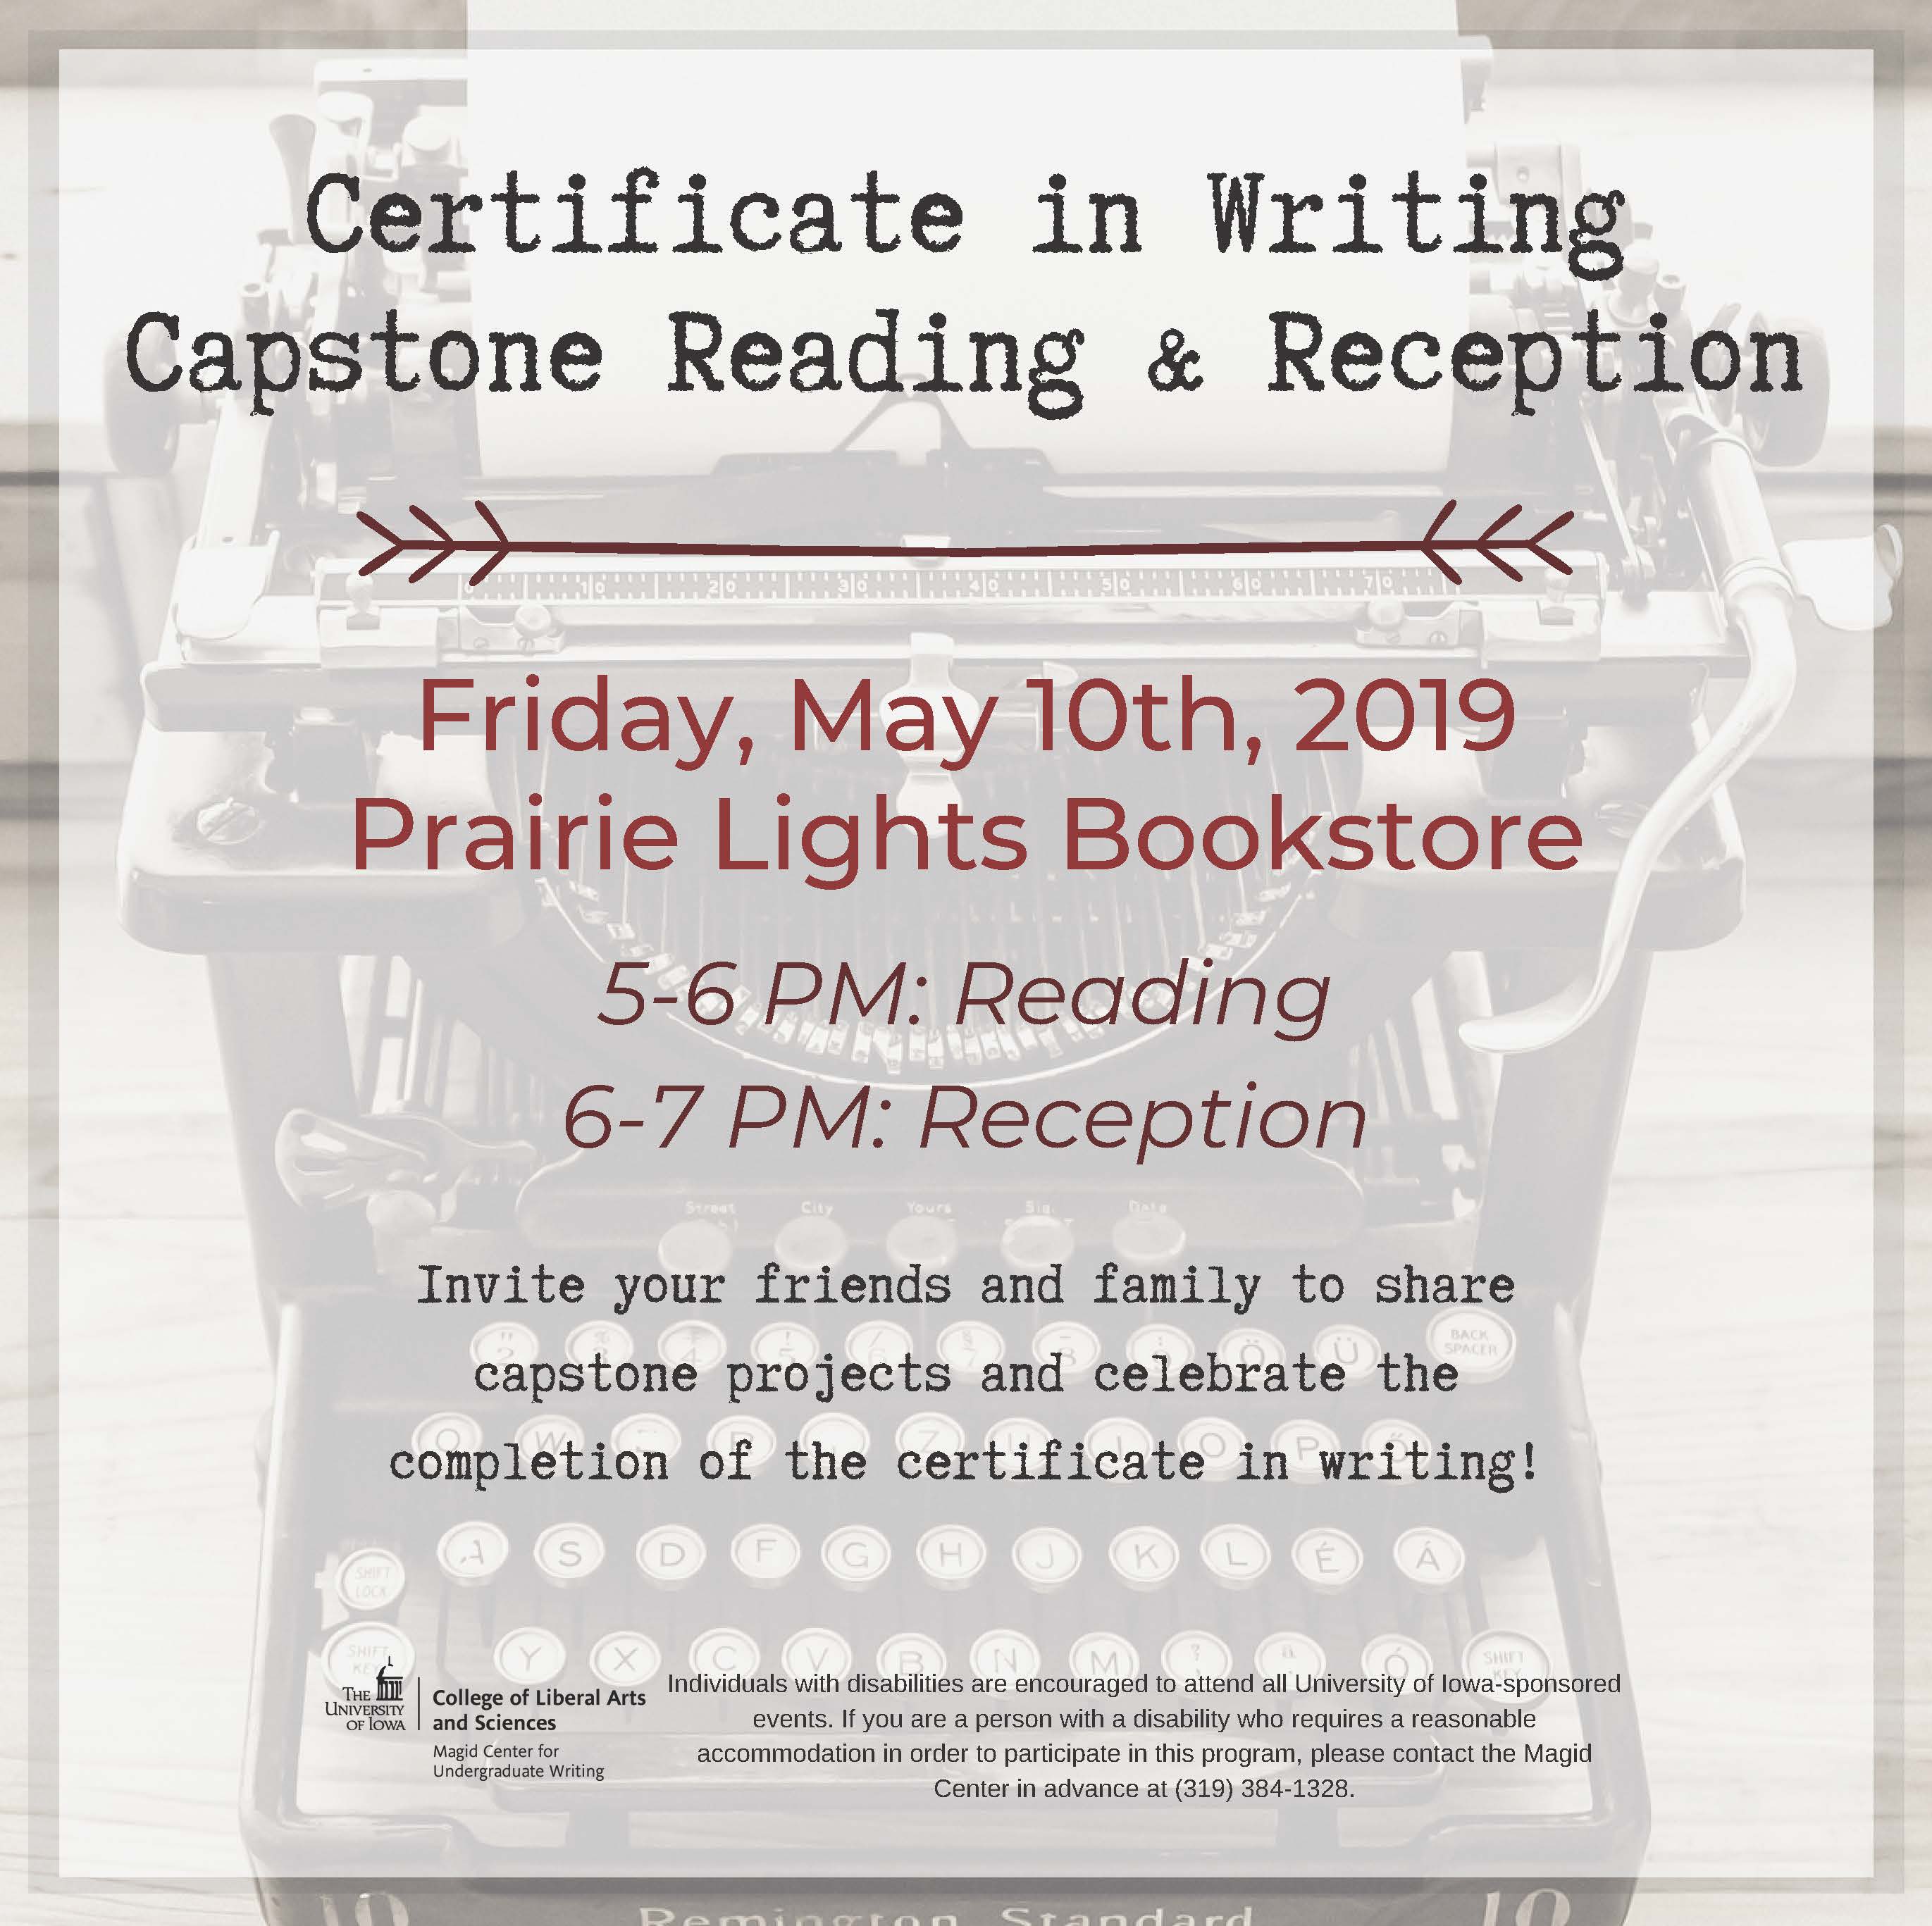 Flyer for Certificate in Writing Capstone Reading and Reception